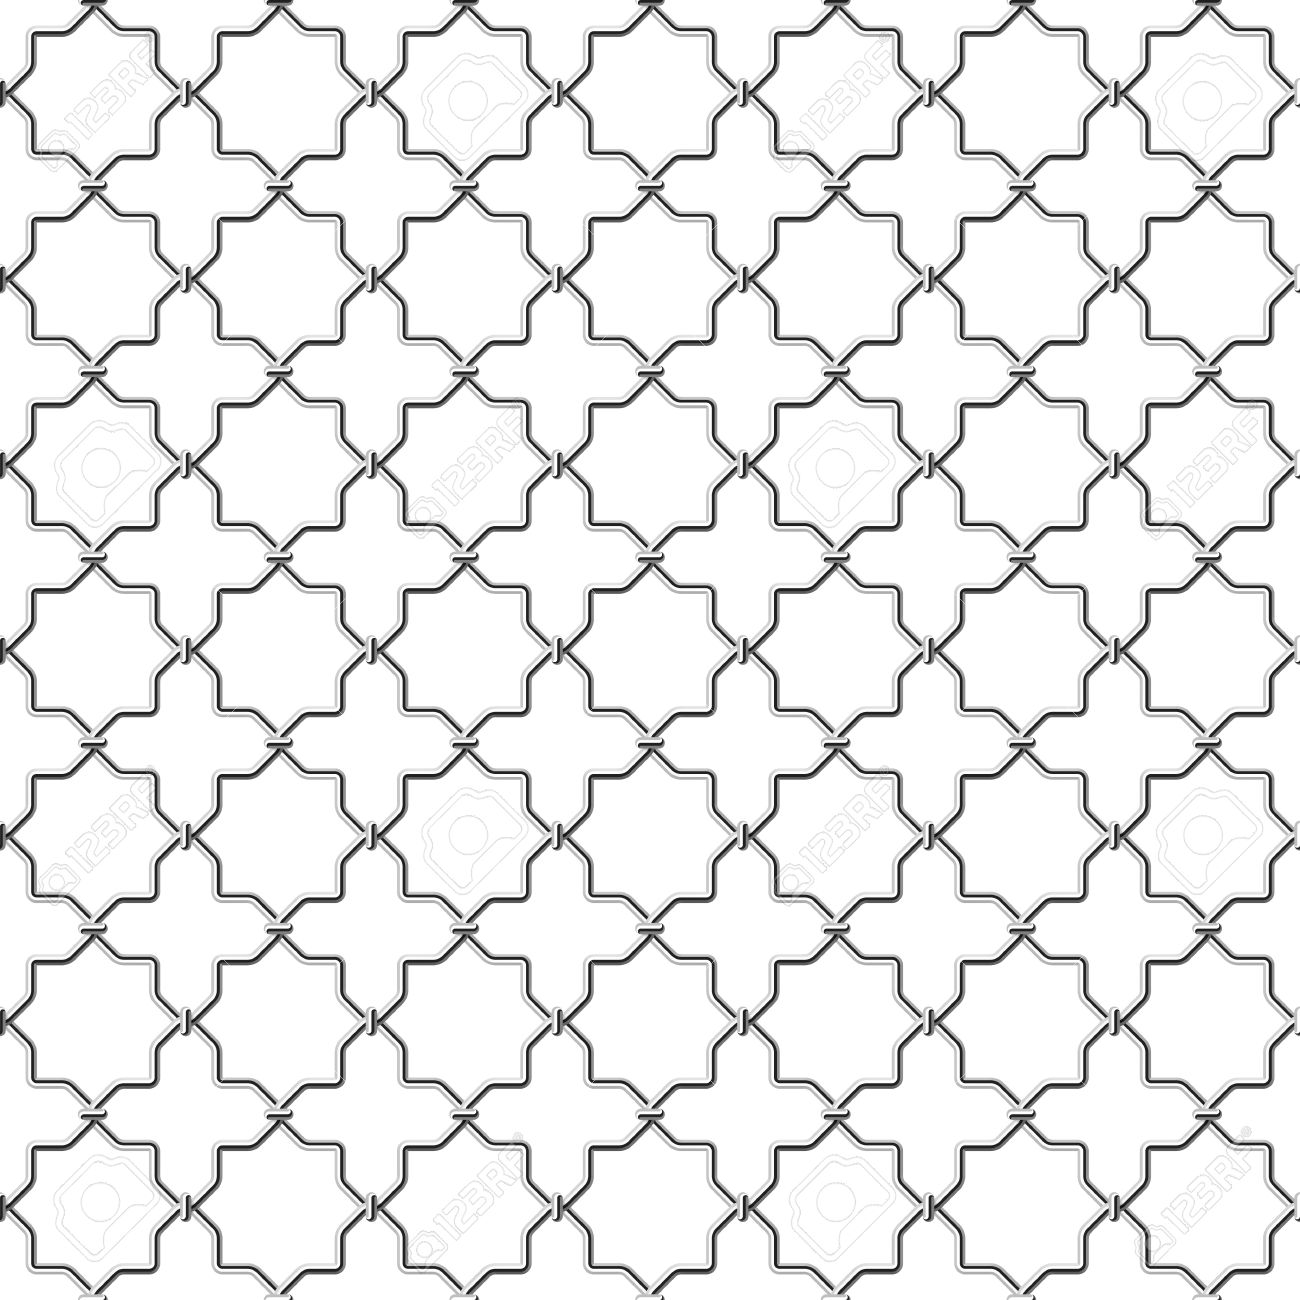 Seamless Metal Lattice Royalty Free Cliparts, Vectors, And Stock.